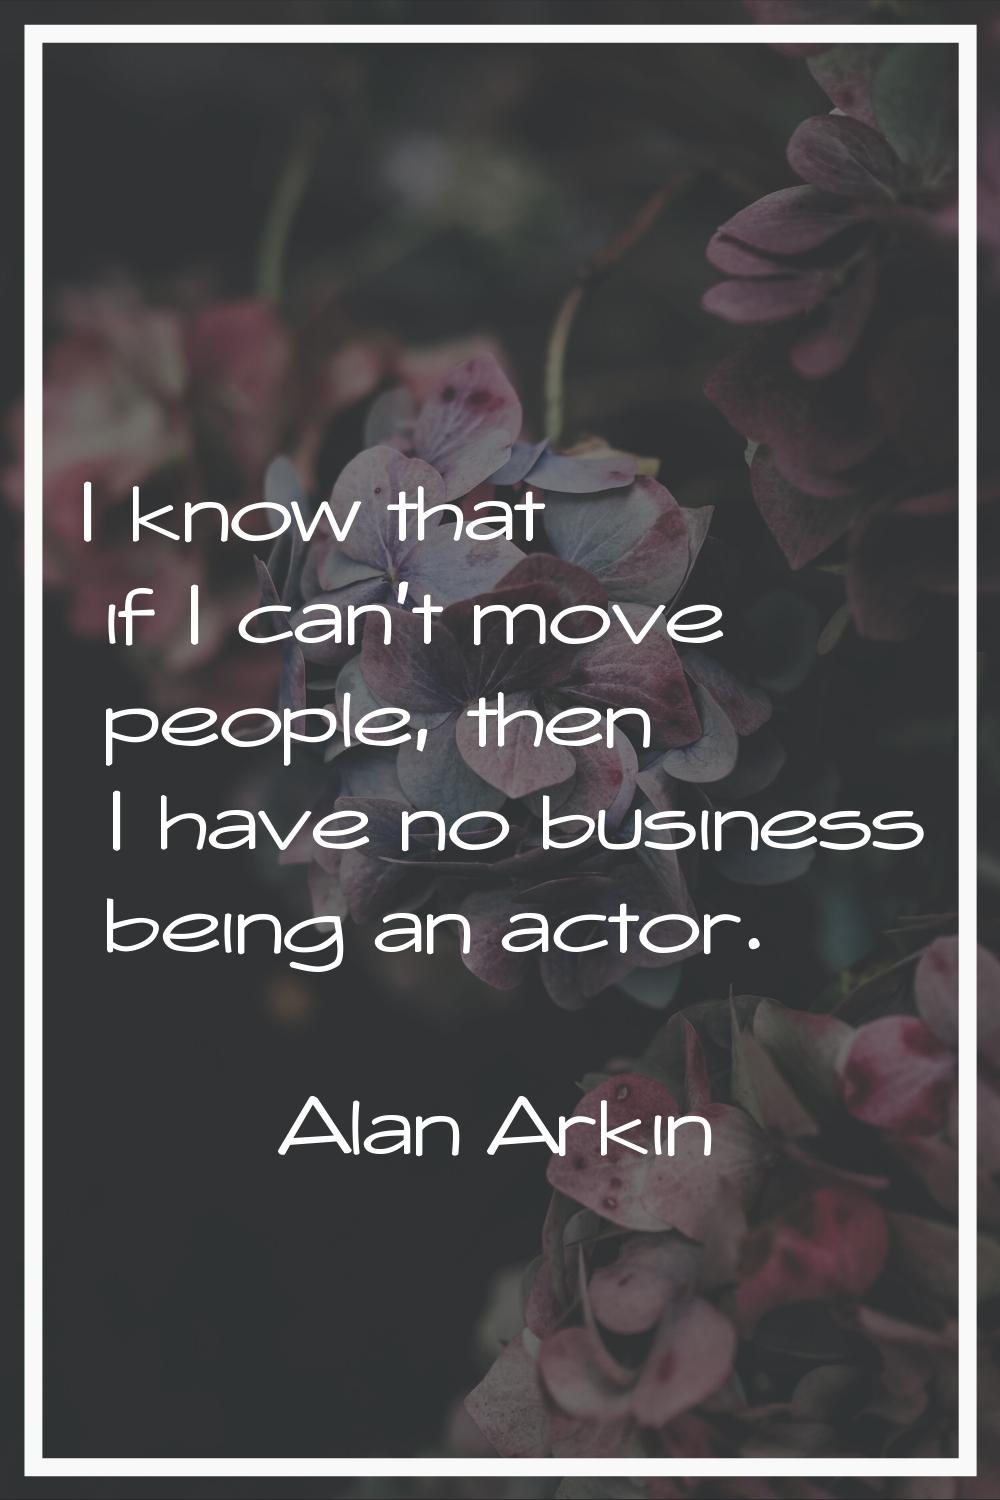 I know that if I can't move people, then I have no business being an actor.